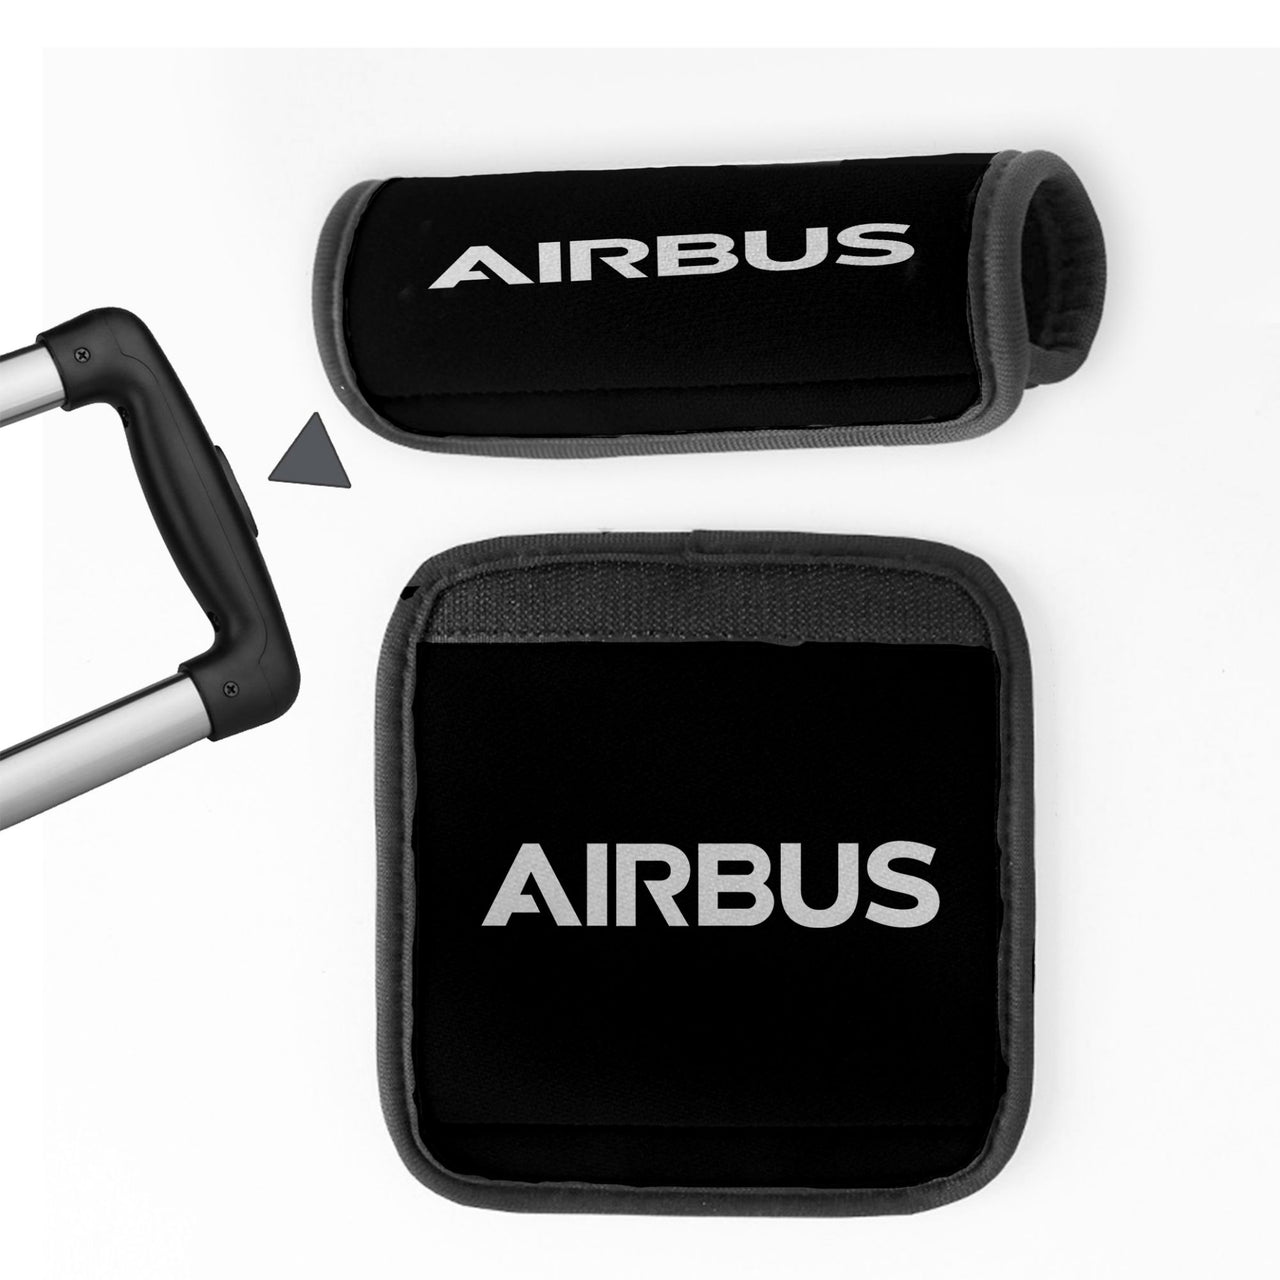 Airbus & Text Designed Neoprene Luggage Handle Covers